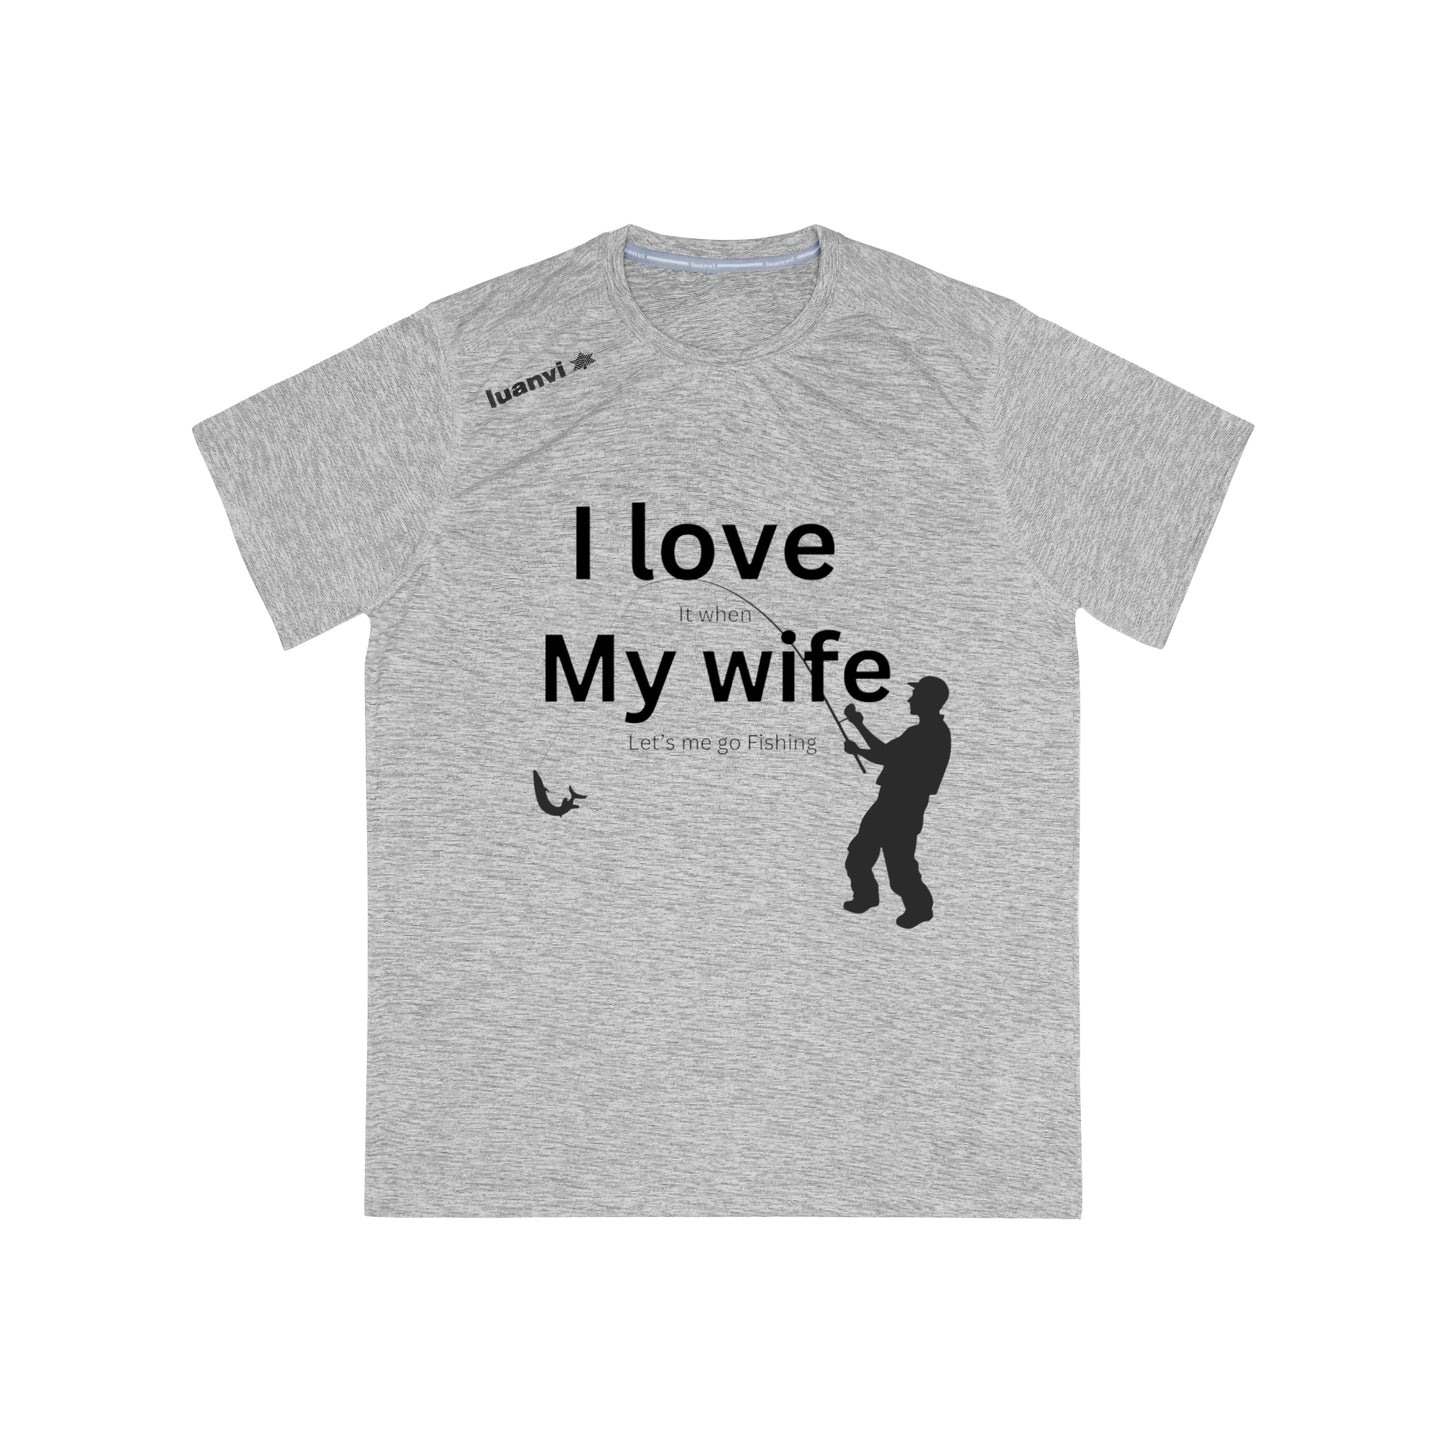 ‘I LOVE it when MY WIFE lets me go fishing’ Printed Front & Back.  Men's Sports T-shirt